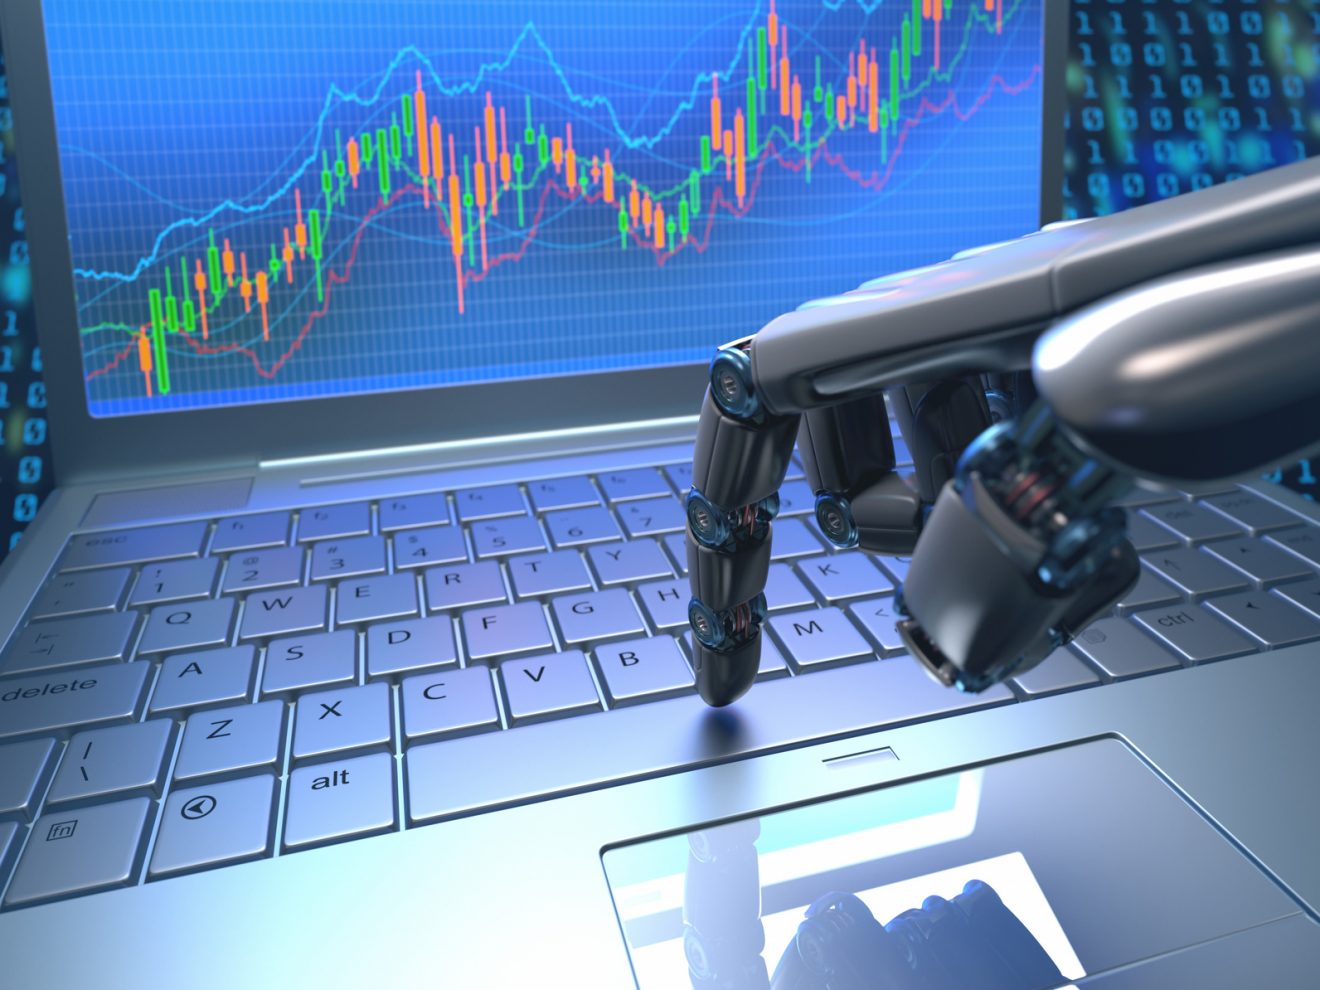 Automated trader forex the basics of investing key